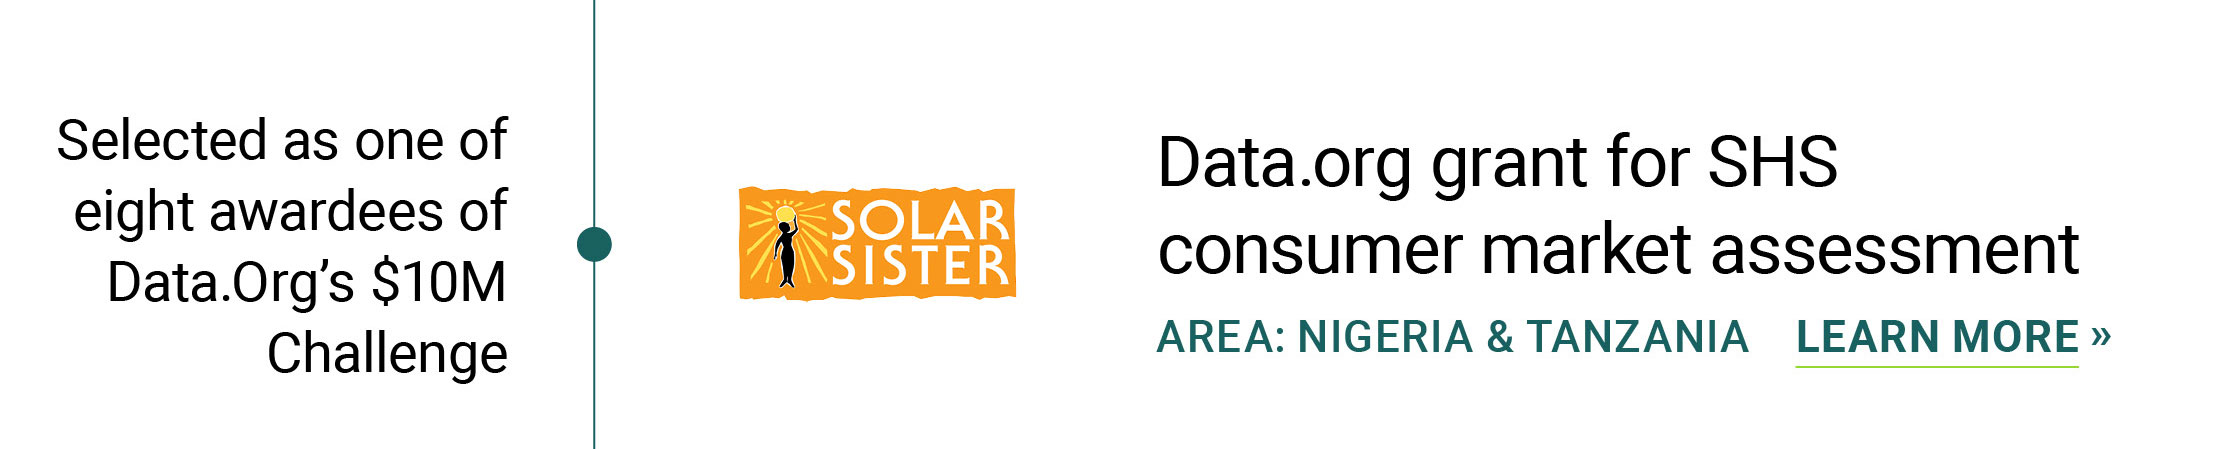 March 2021 Solar Sister , under Data.org grant for SHS consumer market assessment Solar Sister Nigeria, Tanzania Fraym & Solar Sister selected as one of eight awardees of Data.Org’s $10M Challenge!